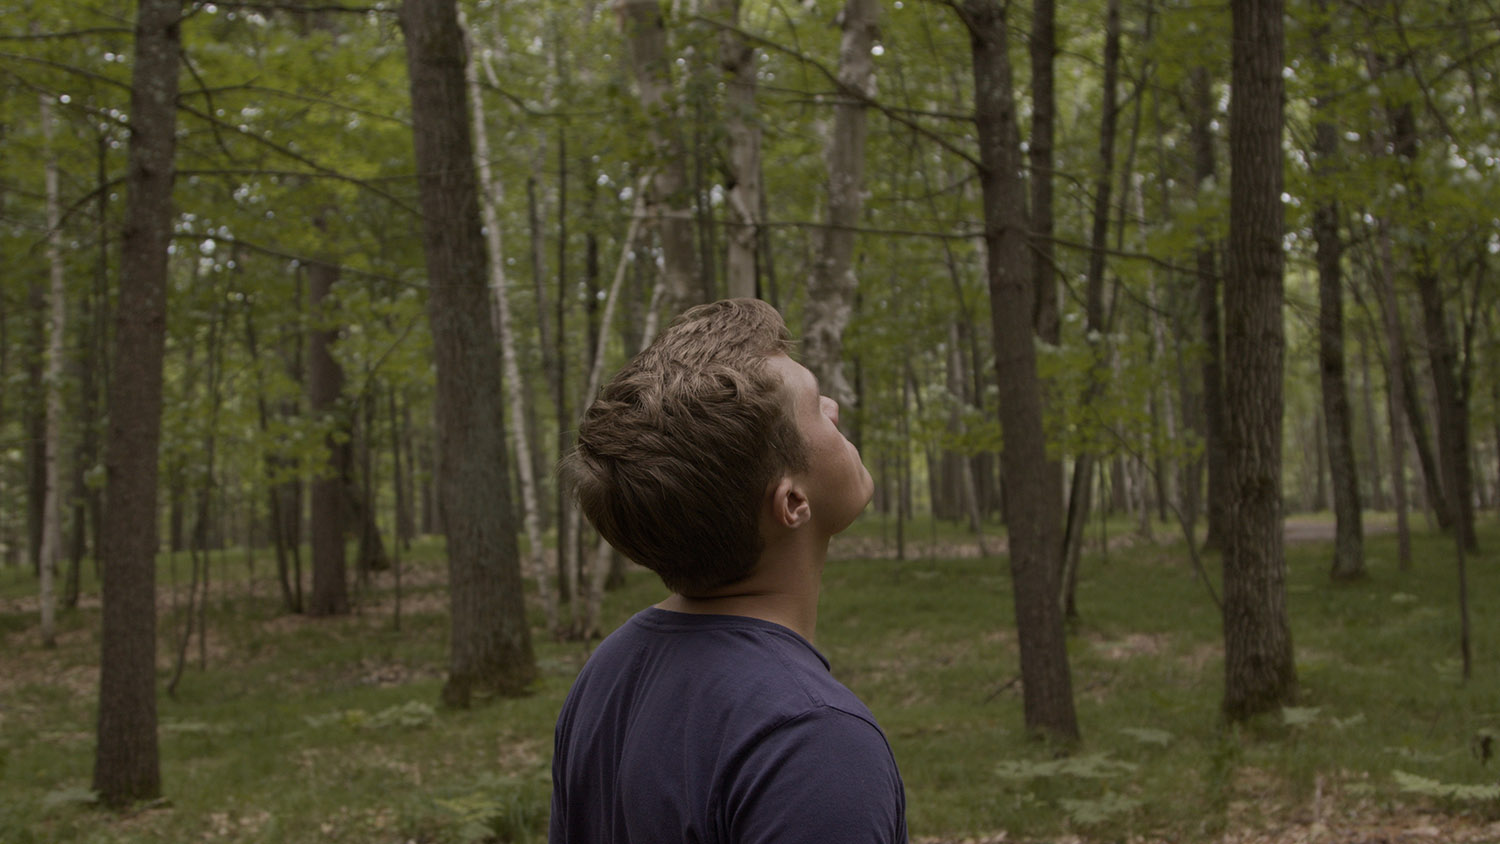 Young man in blue tshirt, in woods, looking up at trees